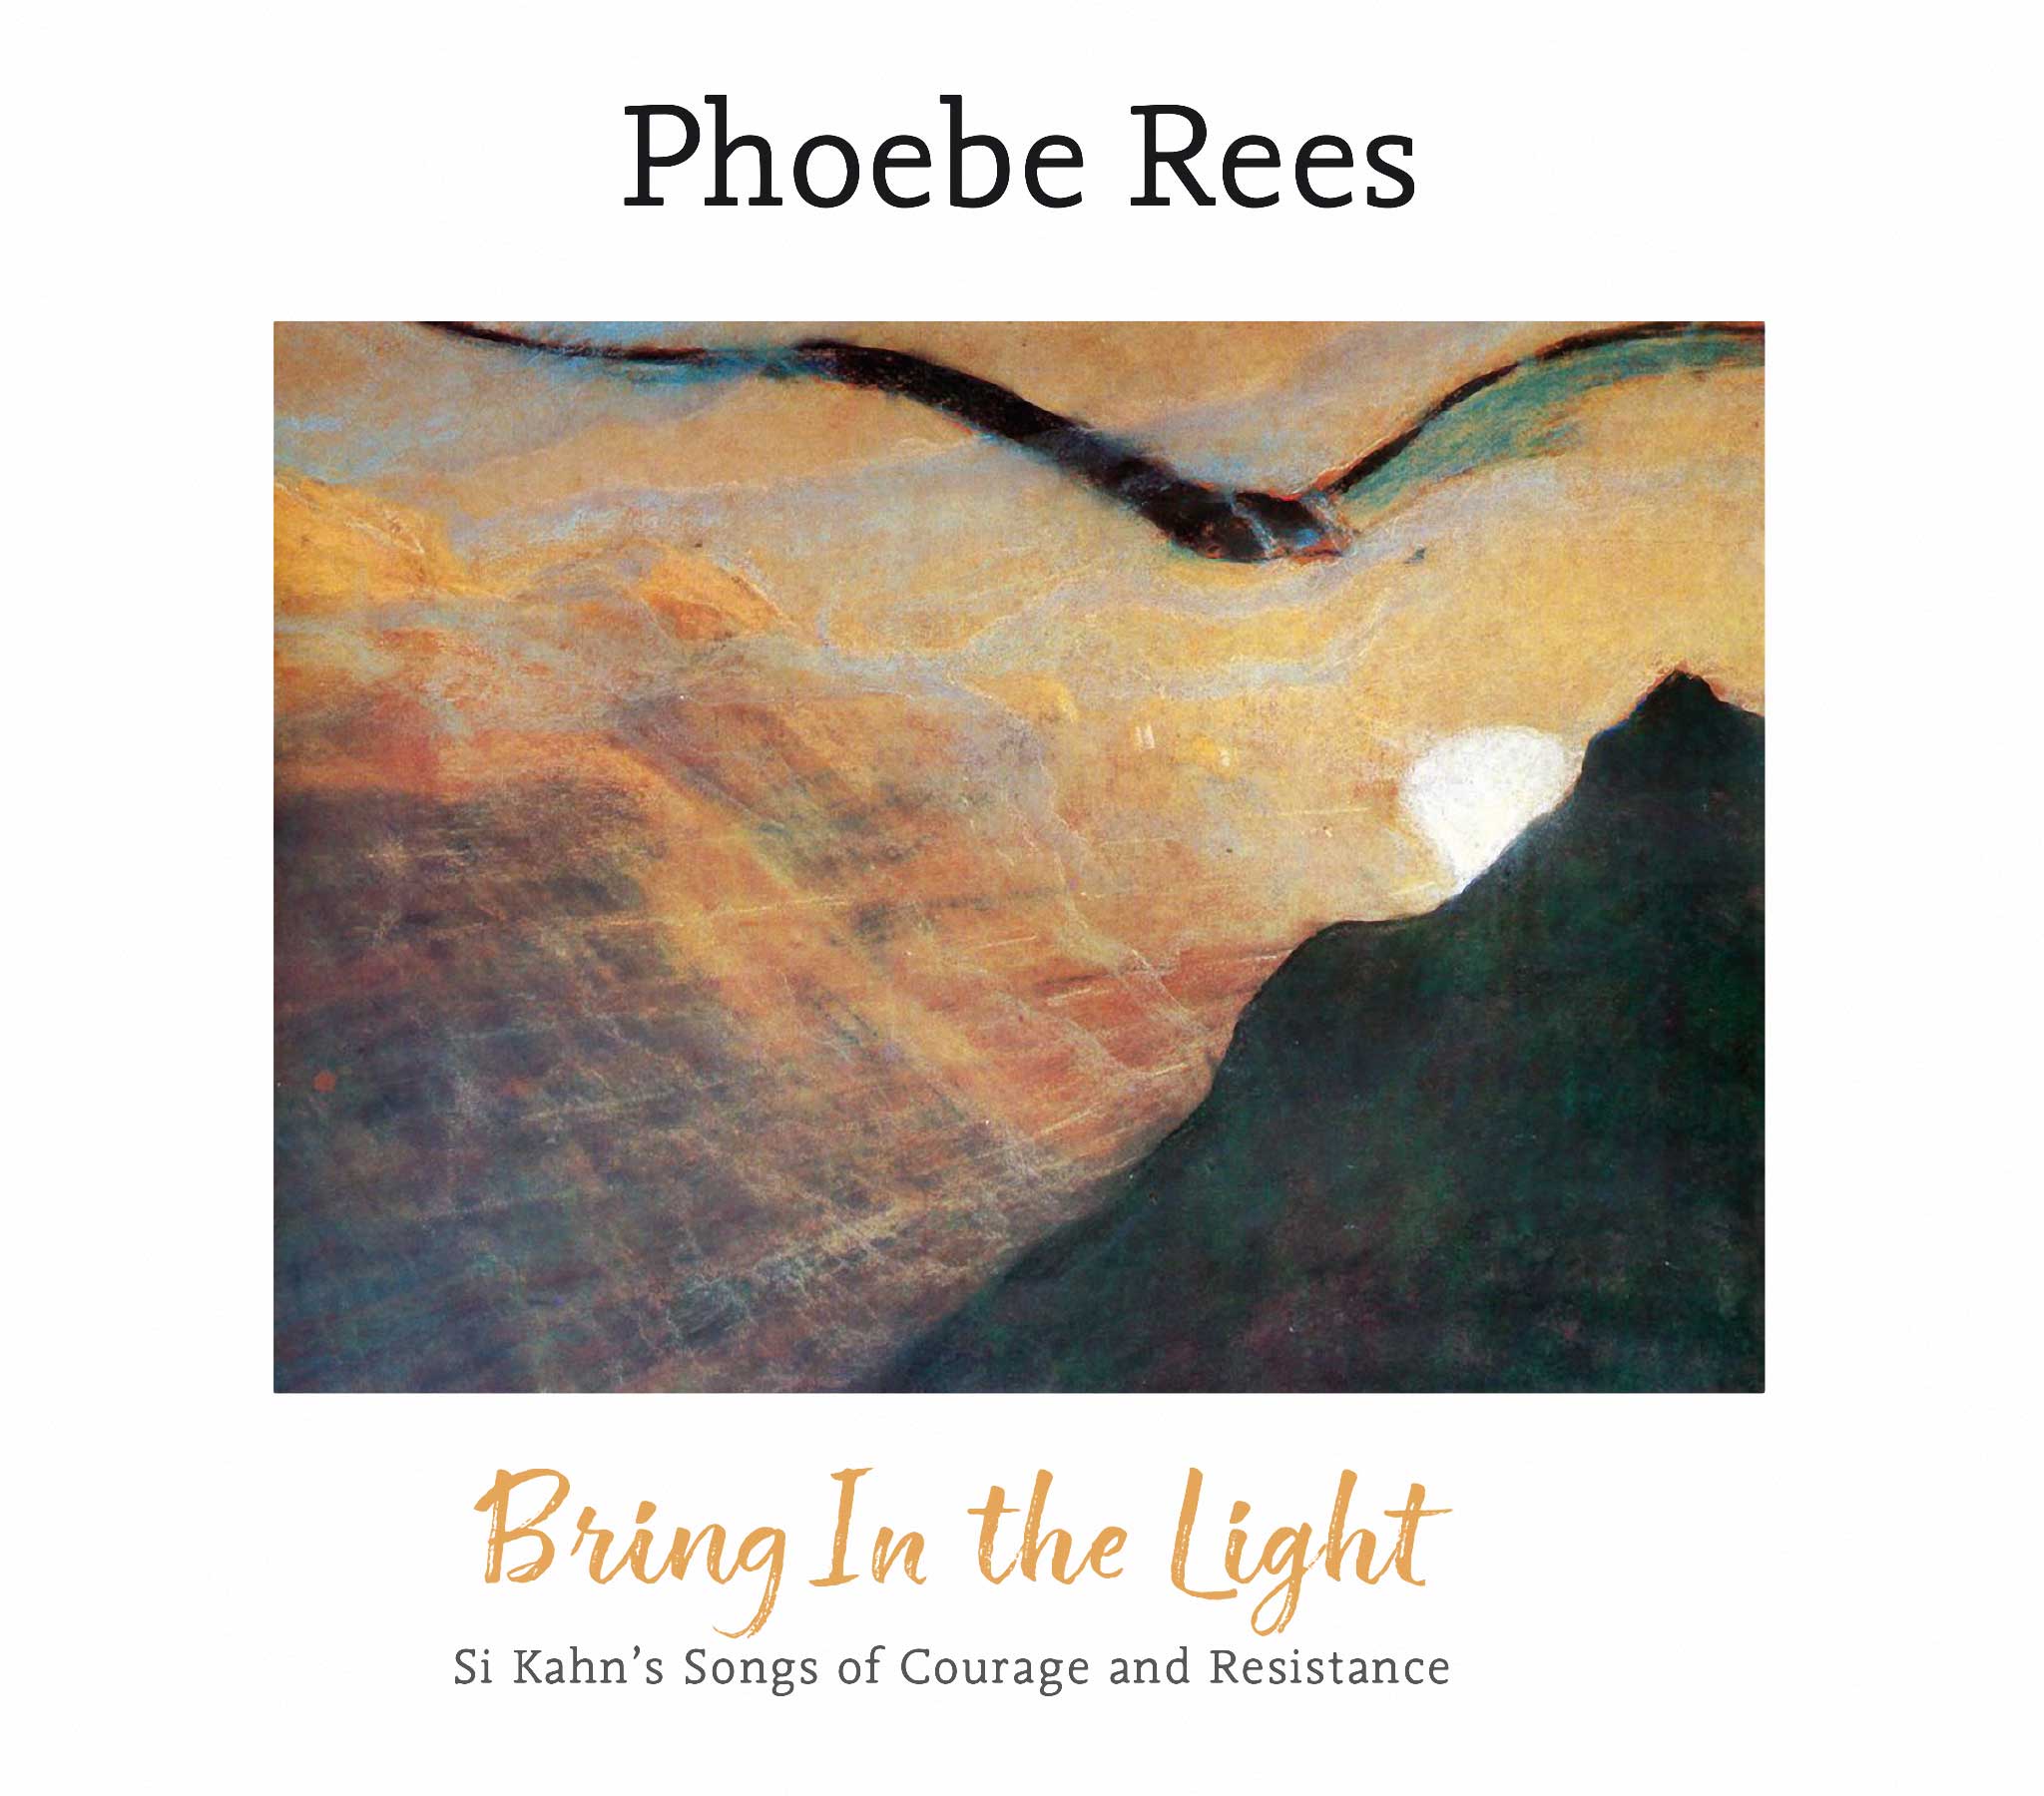 PHOEBE REES - Bring In The Light - Si Kahn's Songs Of Courage And Resistance